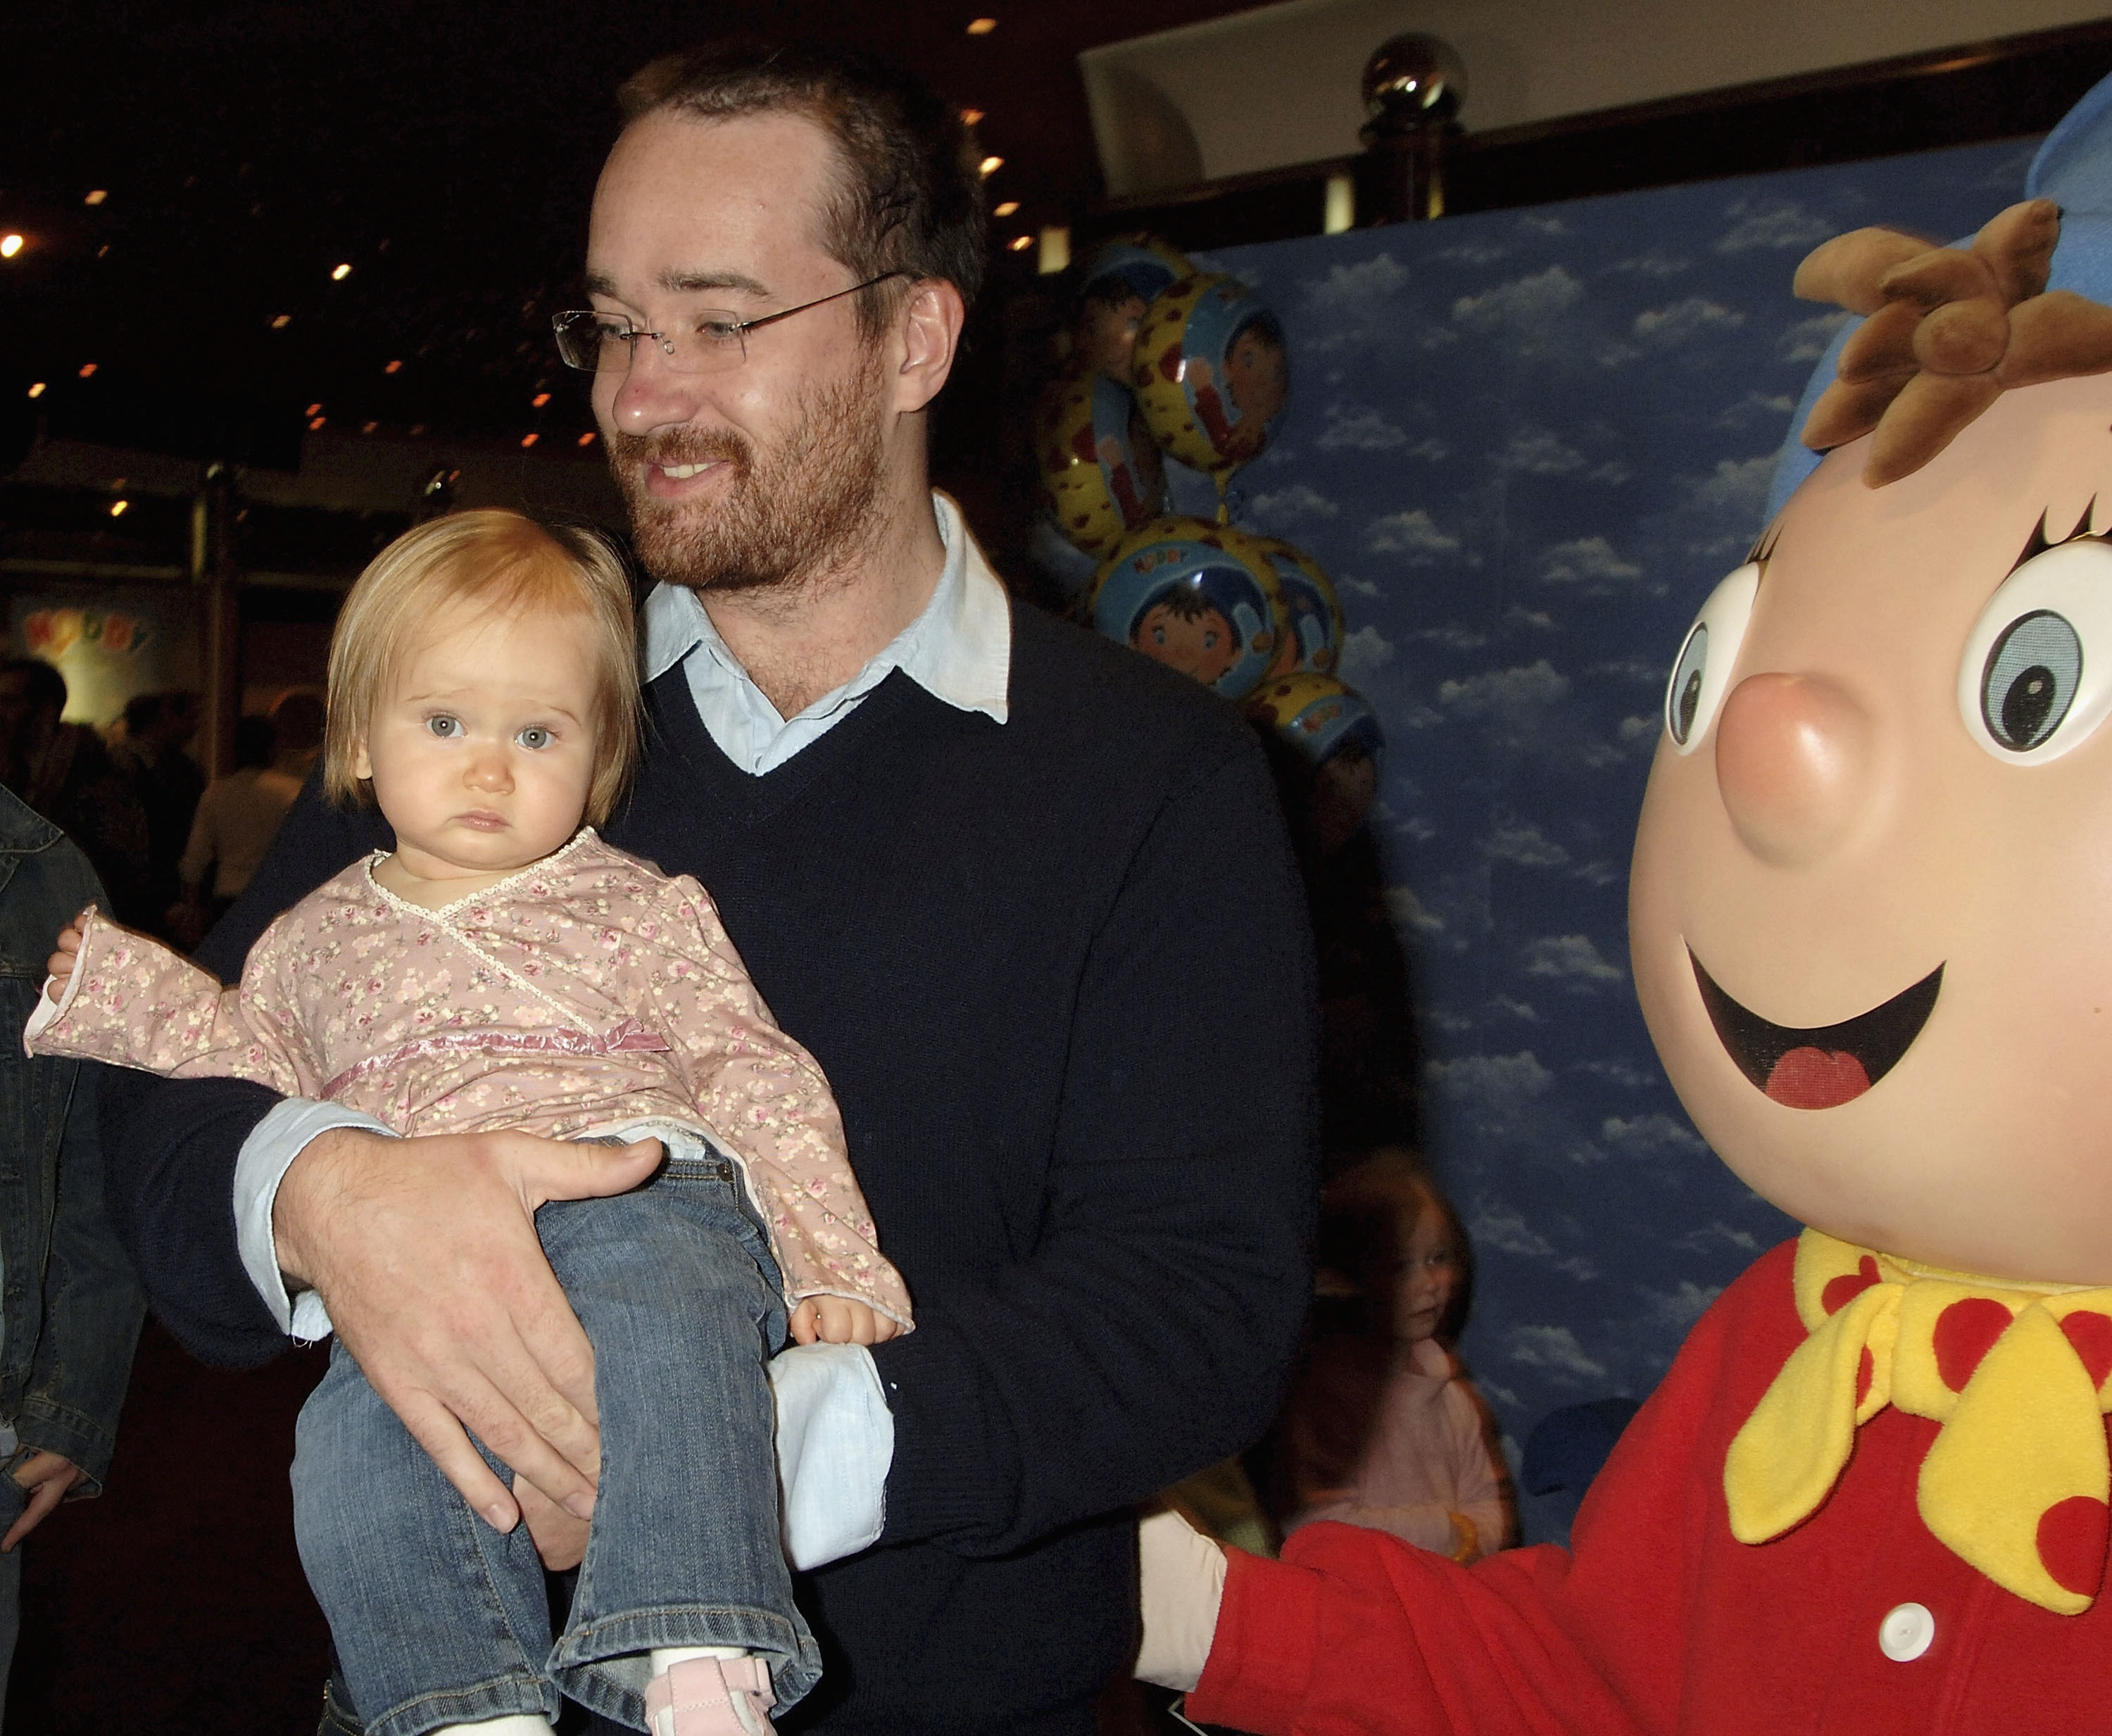 Matthew Macfadyen with his daughter, Maggie Macfadyen, attend the Charity DVD Premiere for "Noddy And The Island Adventure" at the Empire Leicester Square on October 23, 2005, in London, England. | Source: Getty Images